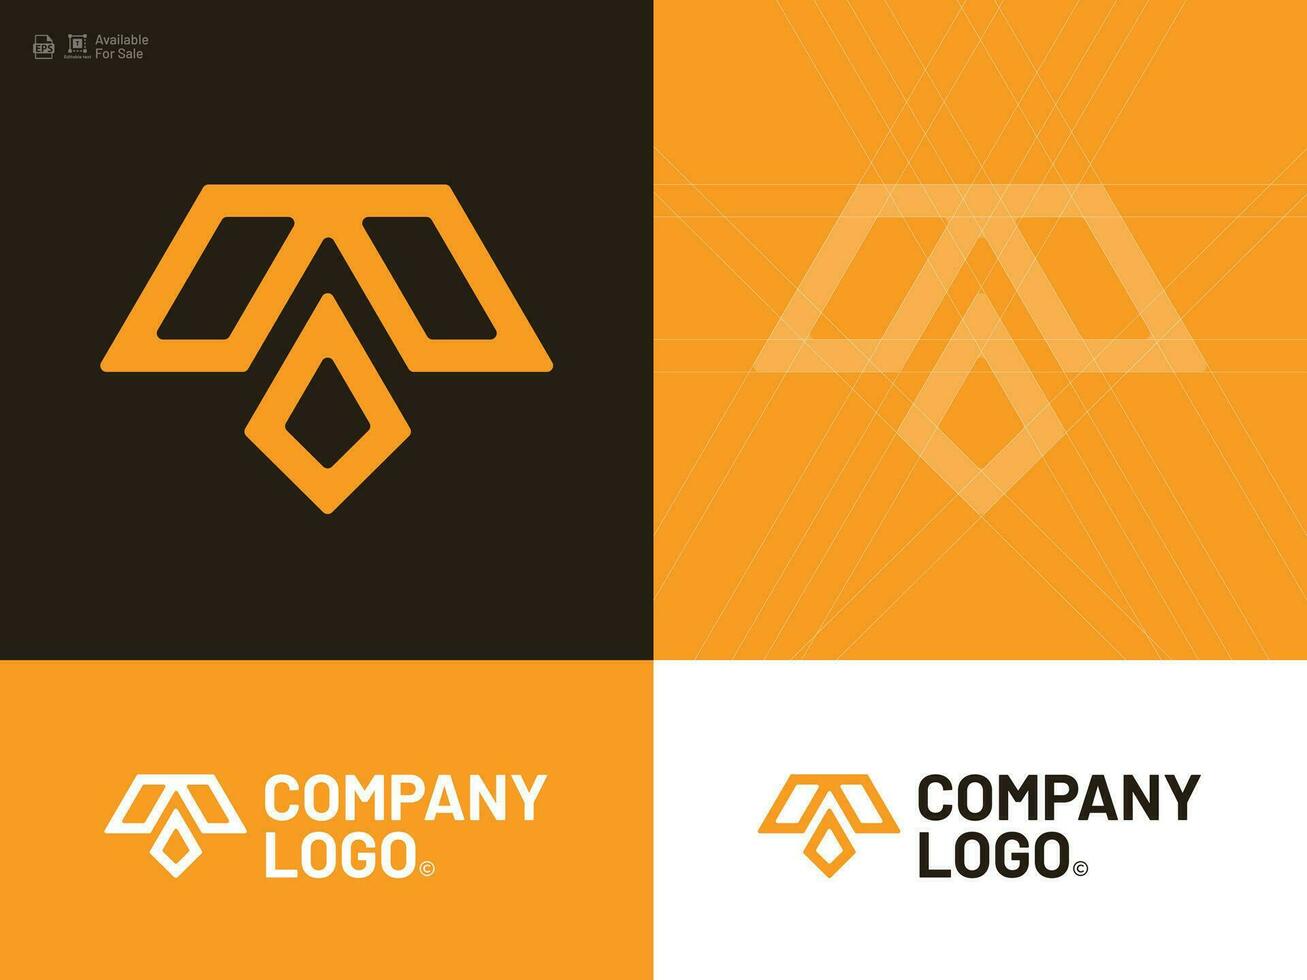 Creative logo design for all kind of company vector